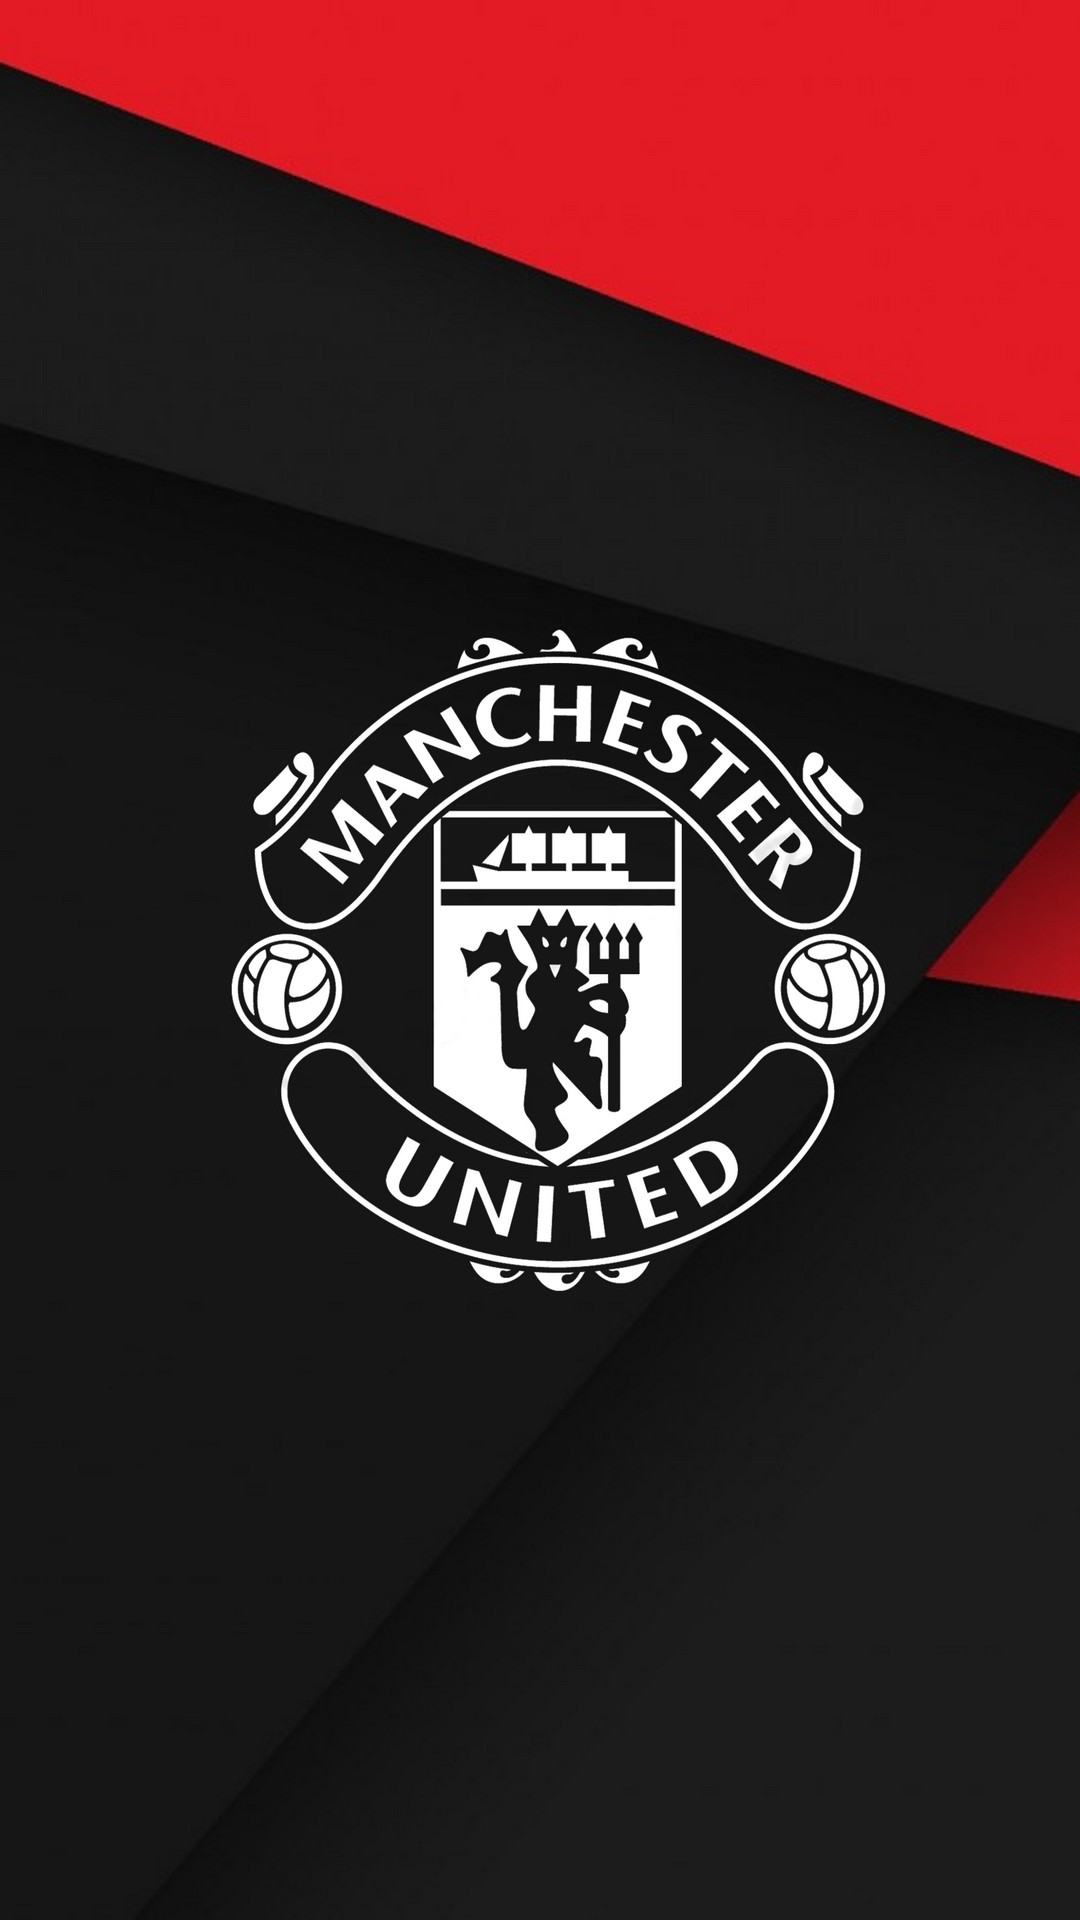 Wallpaper Manchester United Mobile with high-resolution 1080x1920 pixel. You can use this wallpaper for your Desktop Computers, Mac Screensavers, Windows Backgrounds, iPhone Wallpapers, Tablet or Android Lock screen and another Mobile device